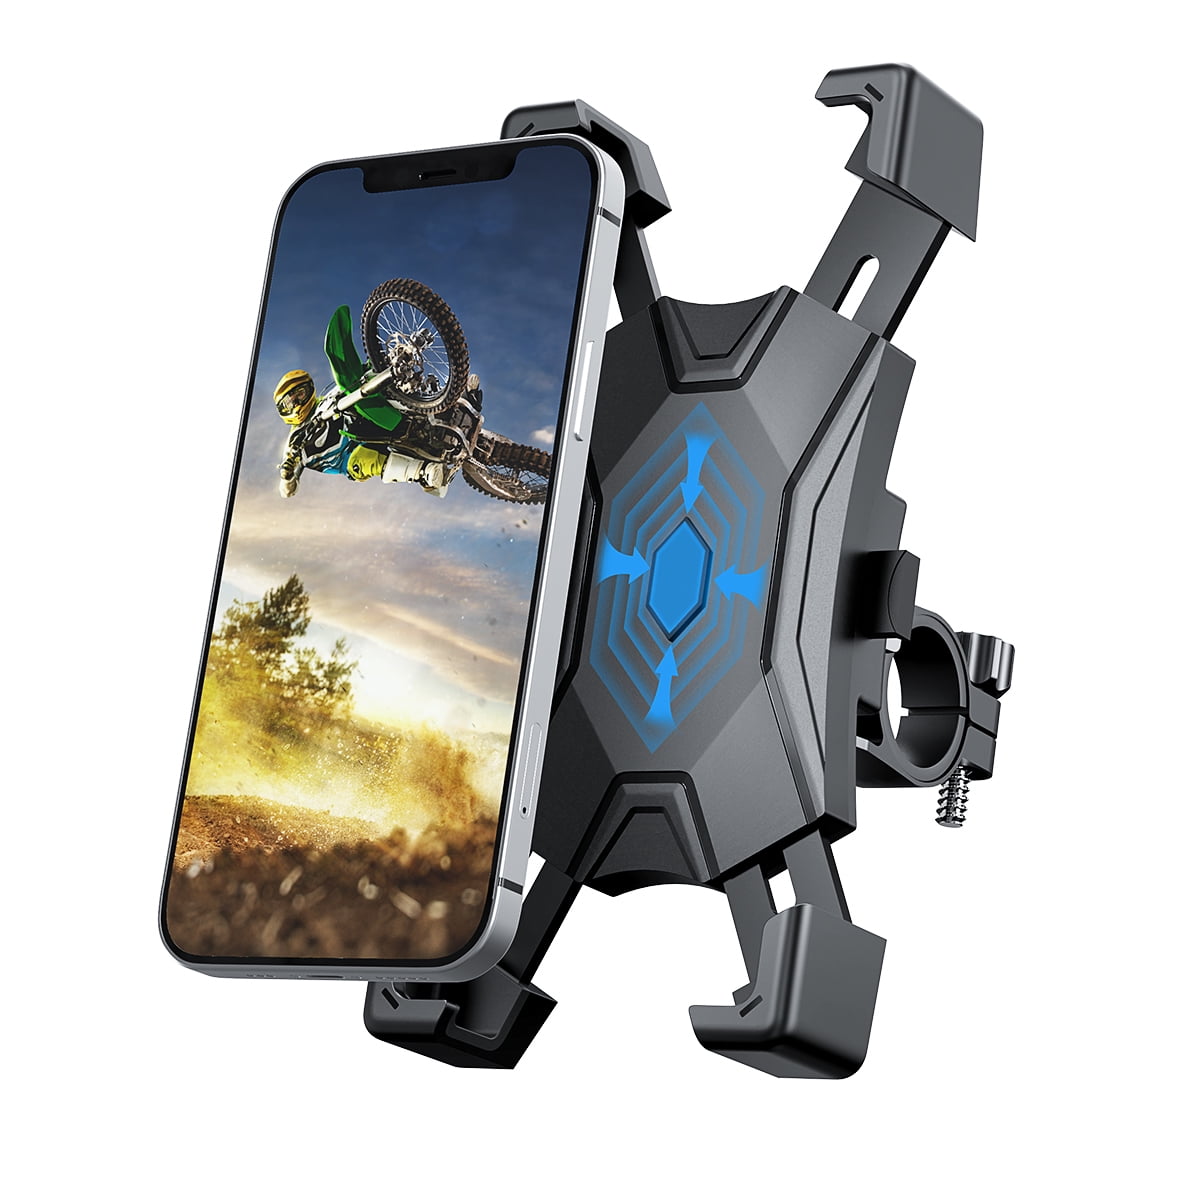 Anti-Shake 360° Rotation Bike Phone Holder 【2020 Mechanical Safety Locking System】 Phone Mount for Bike Anwas Bike Phone Mount Fit for iPhone 11 Pro Max XS XR X 8 7 Plus 6s and All Android Phone 